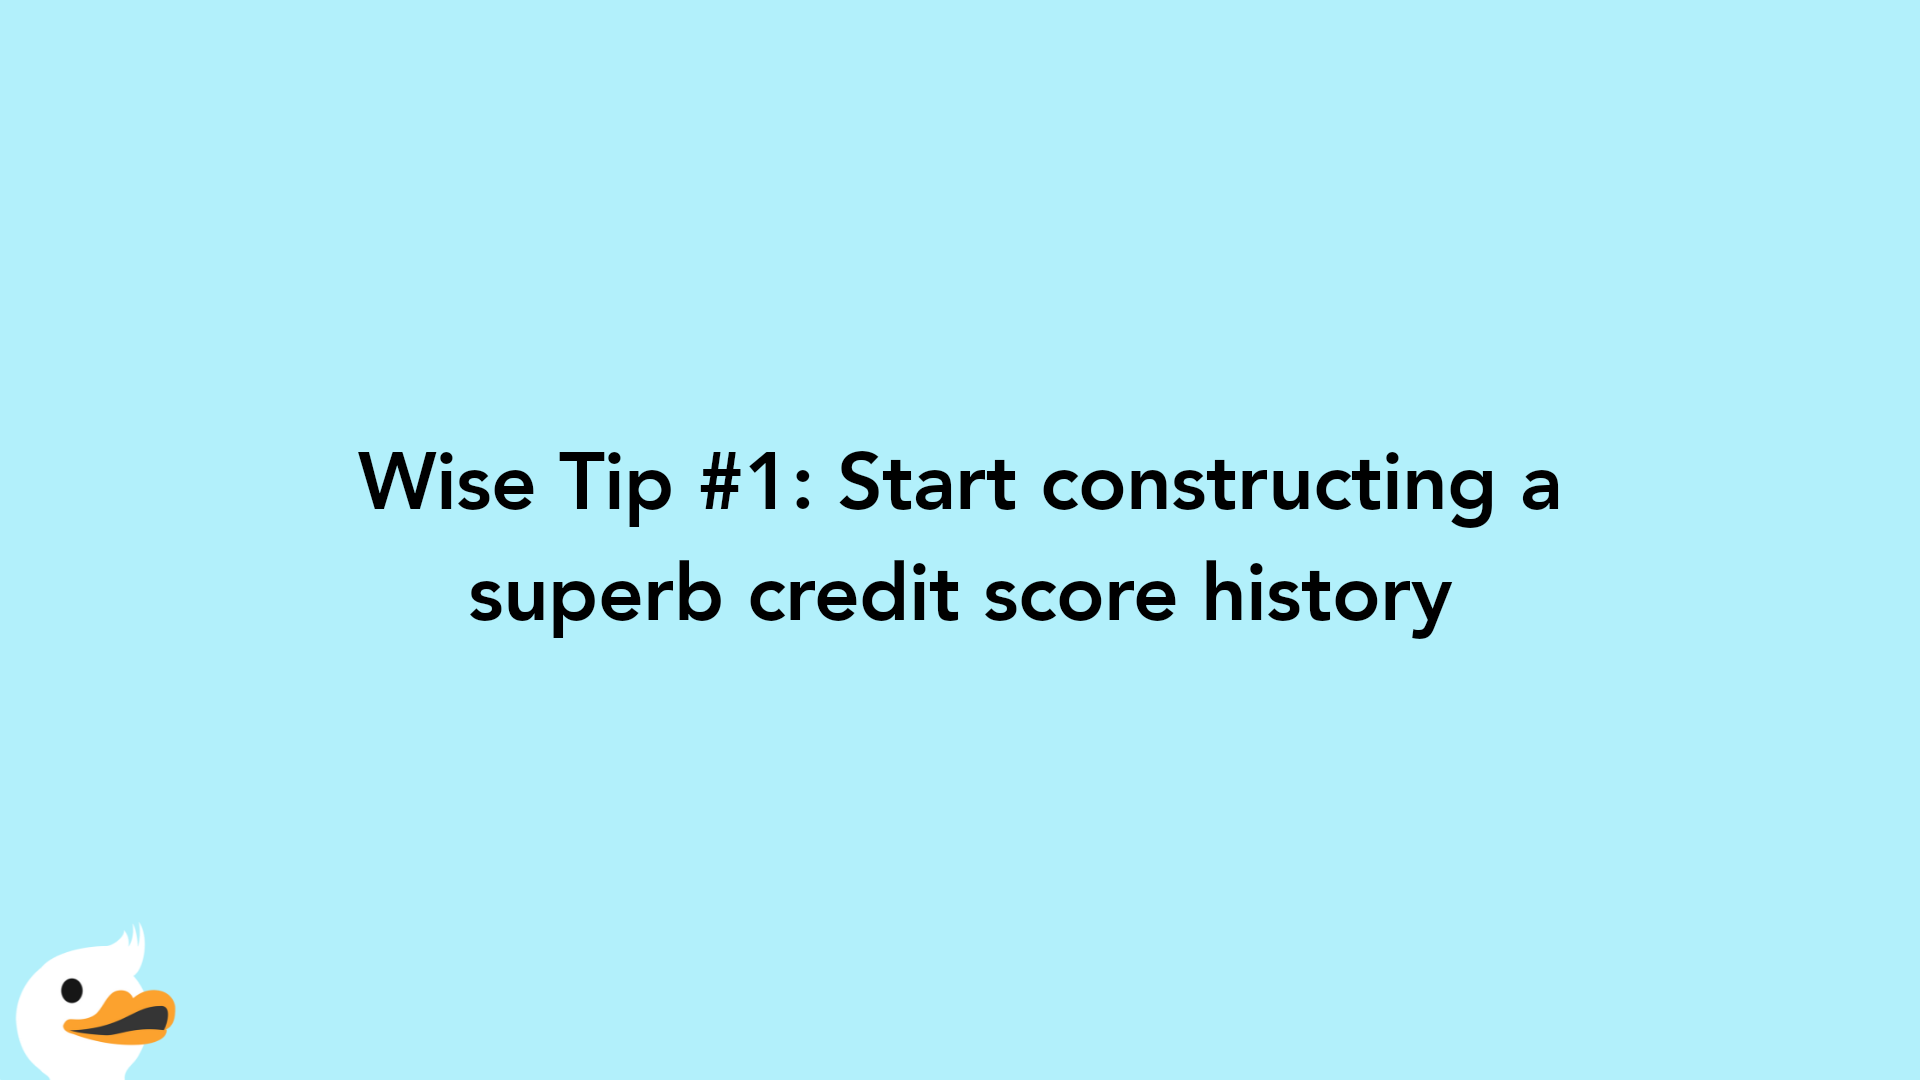 Wise Tip #1: Start constructing a superb credit score history